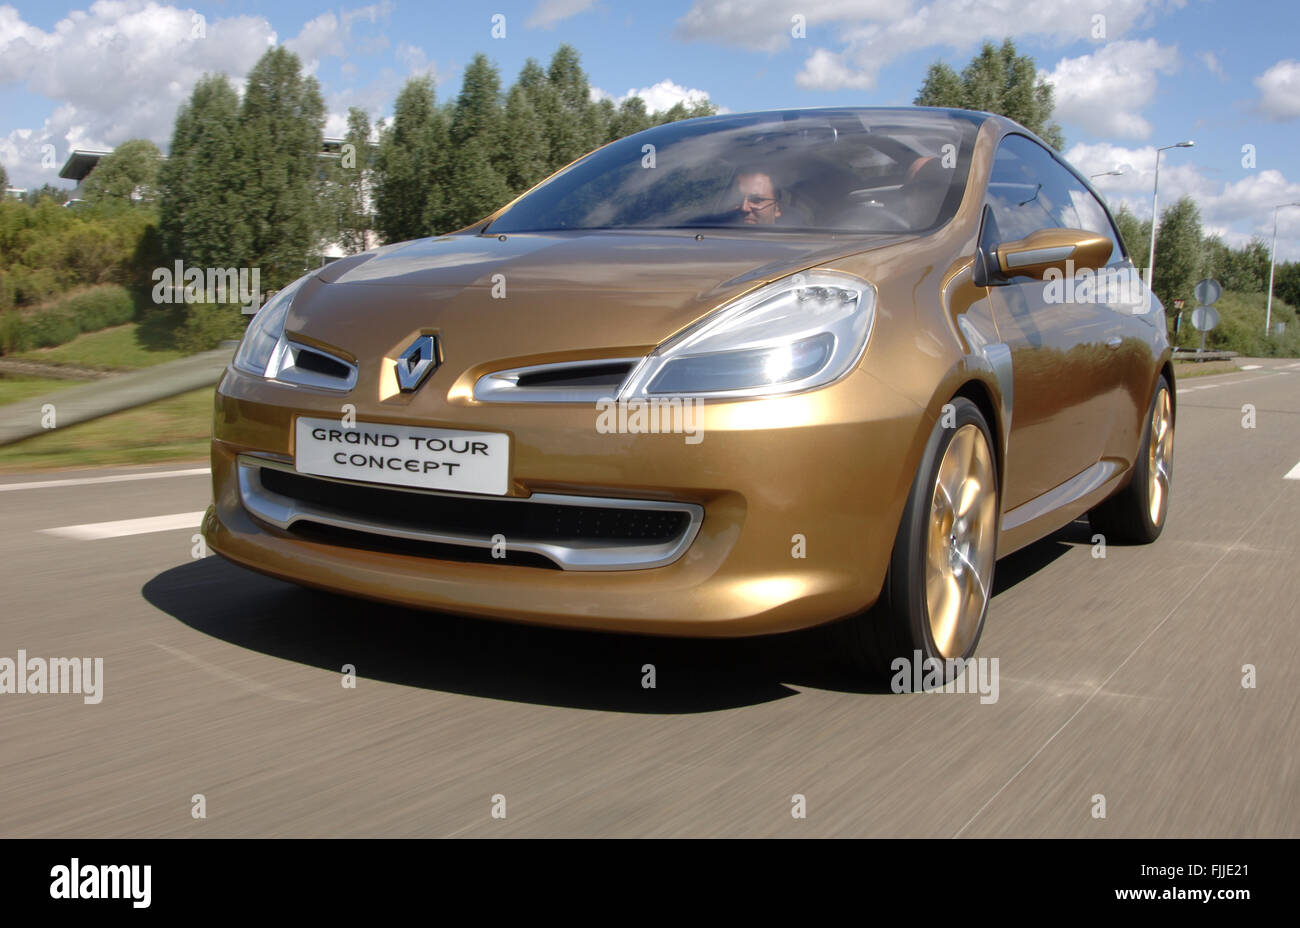 kraam Gluren naaimachine 2007 Renault Grand Tour Concept car, a styling exercise which led to the Mk 4  Clio of 2012 Stock Photo - Alamy